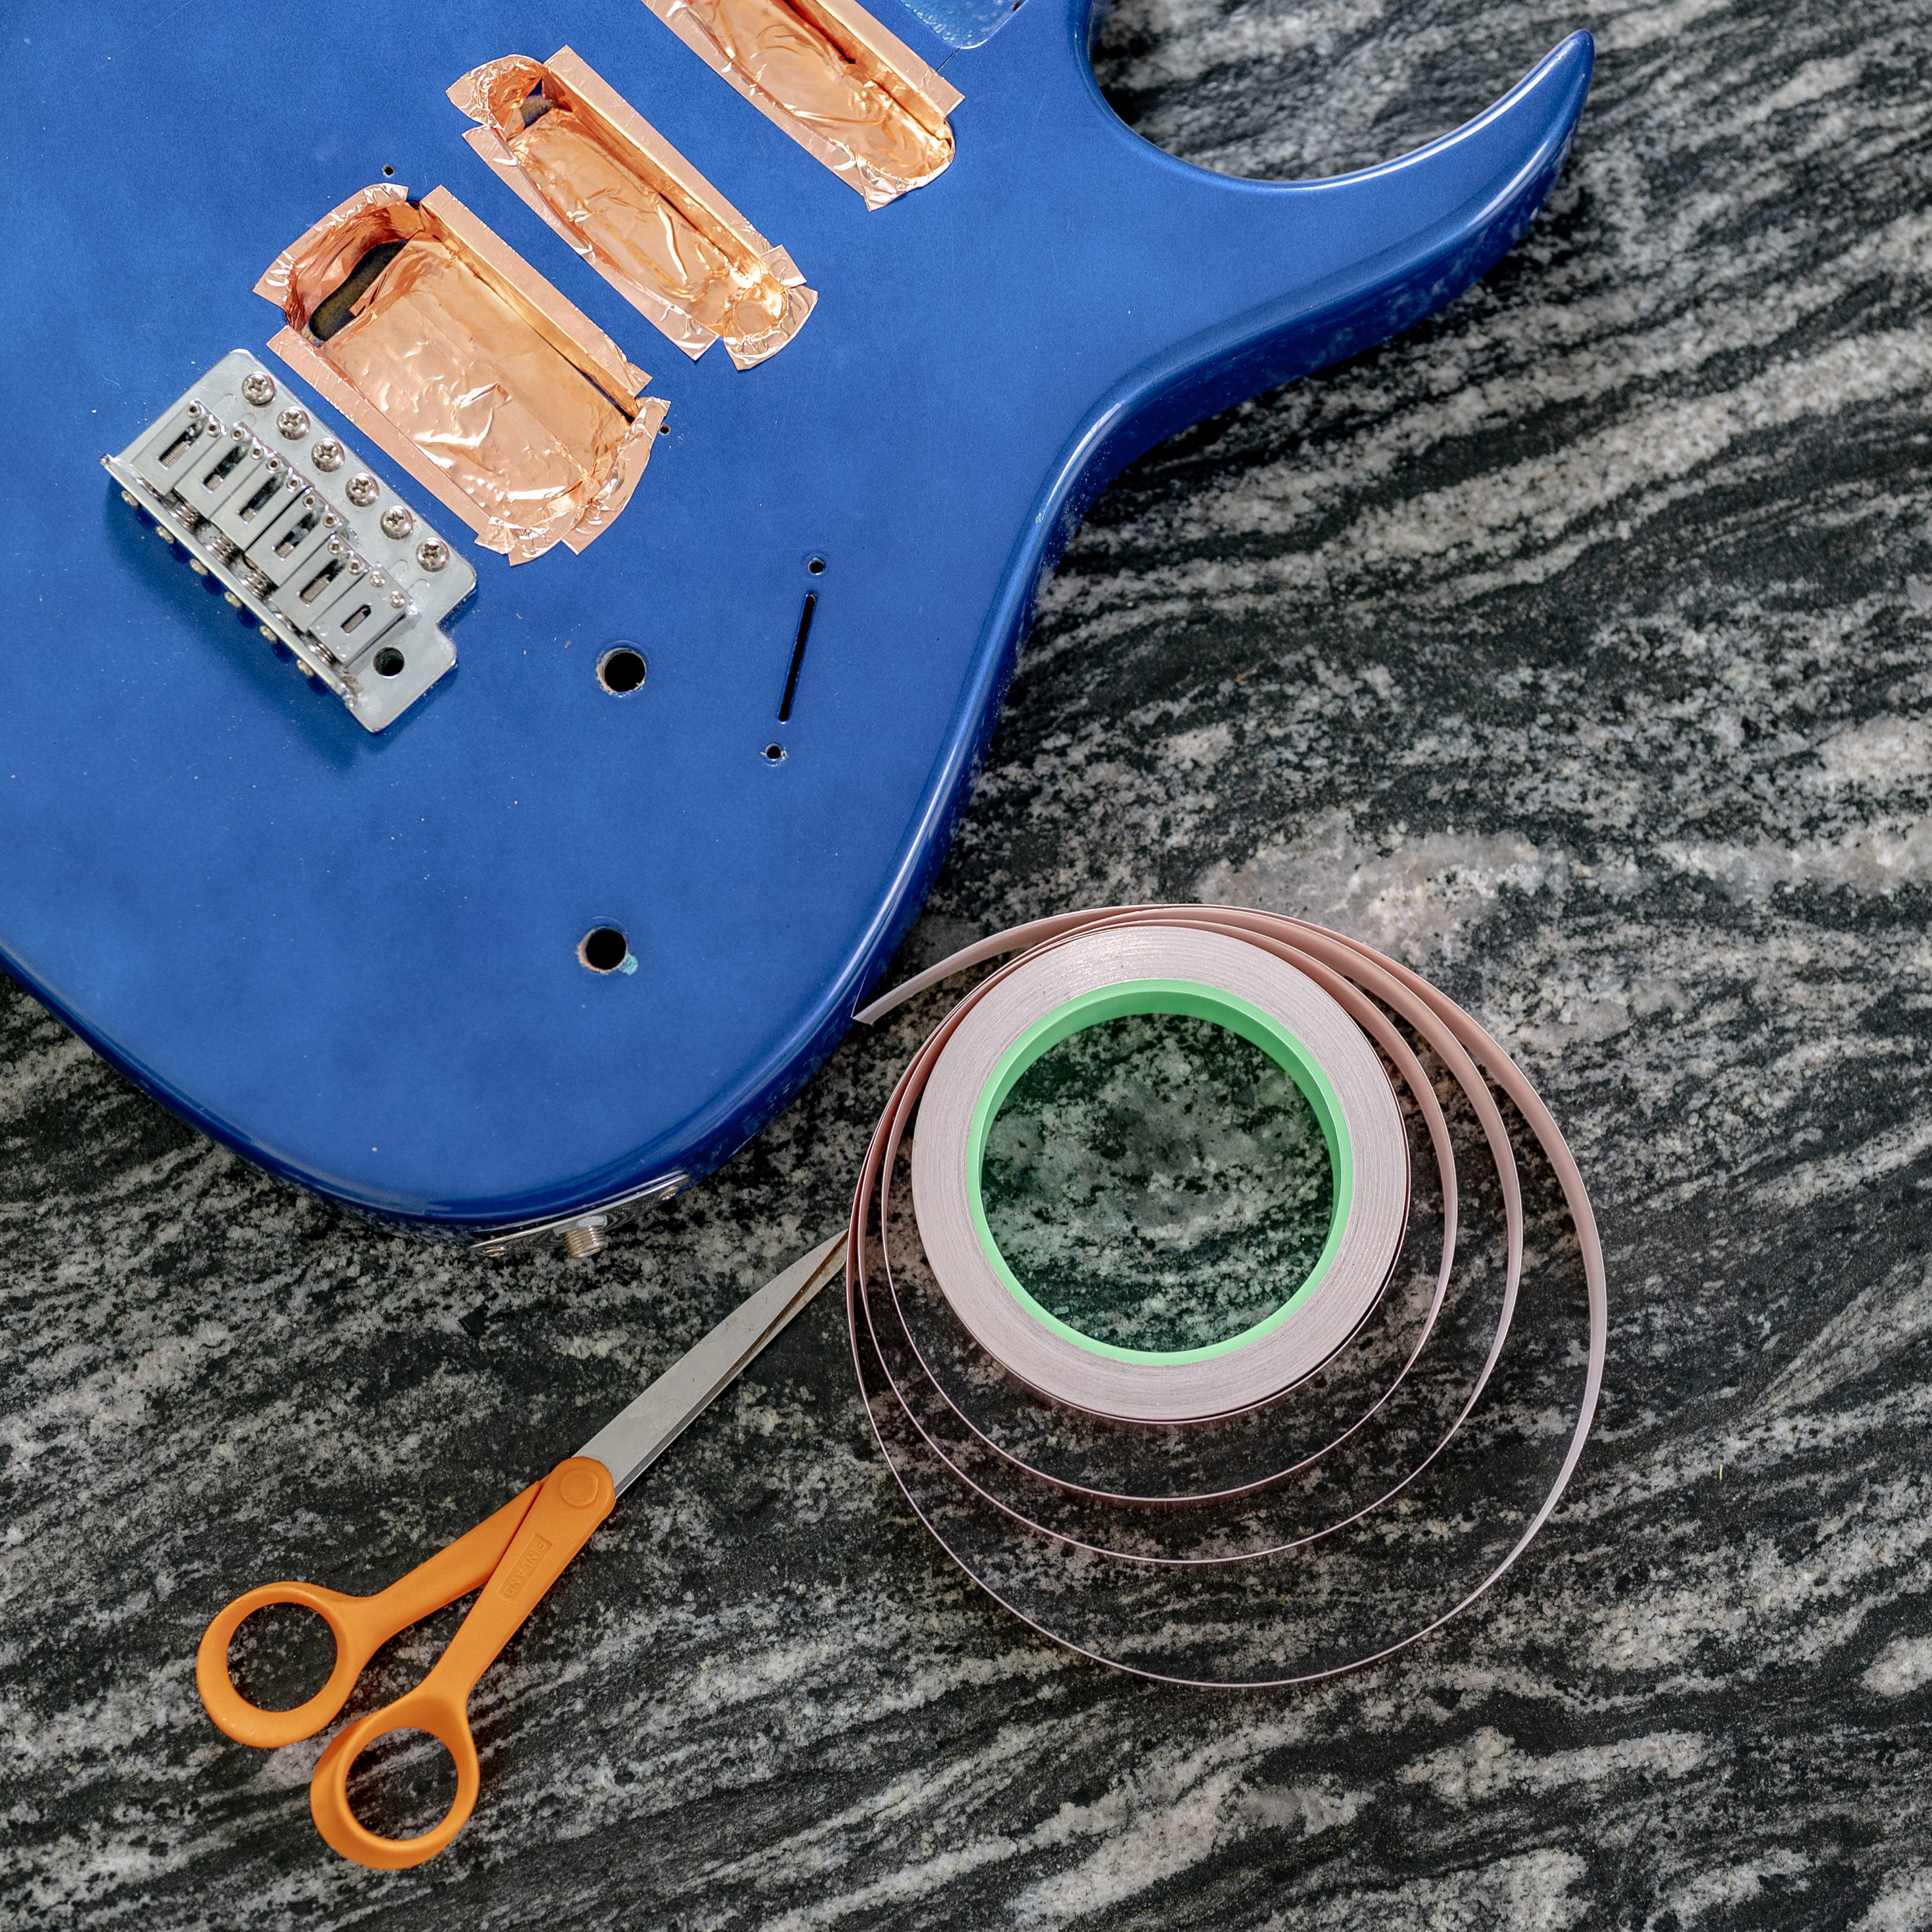 Copper Foil Tape (2inch X 33 FT) with Dual Conductive Adhesive for Guitar  and EMI Shielding, Electrical Repairs, Crafts, Garden, Stained Glass, Paper  Circuits, Soldering, Grounding